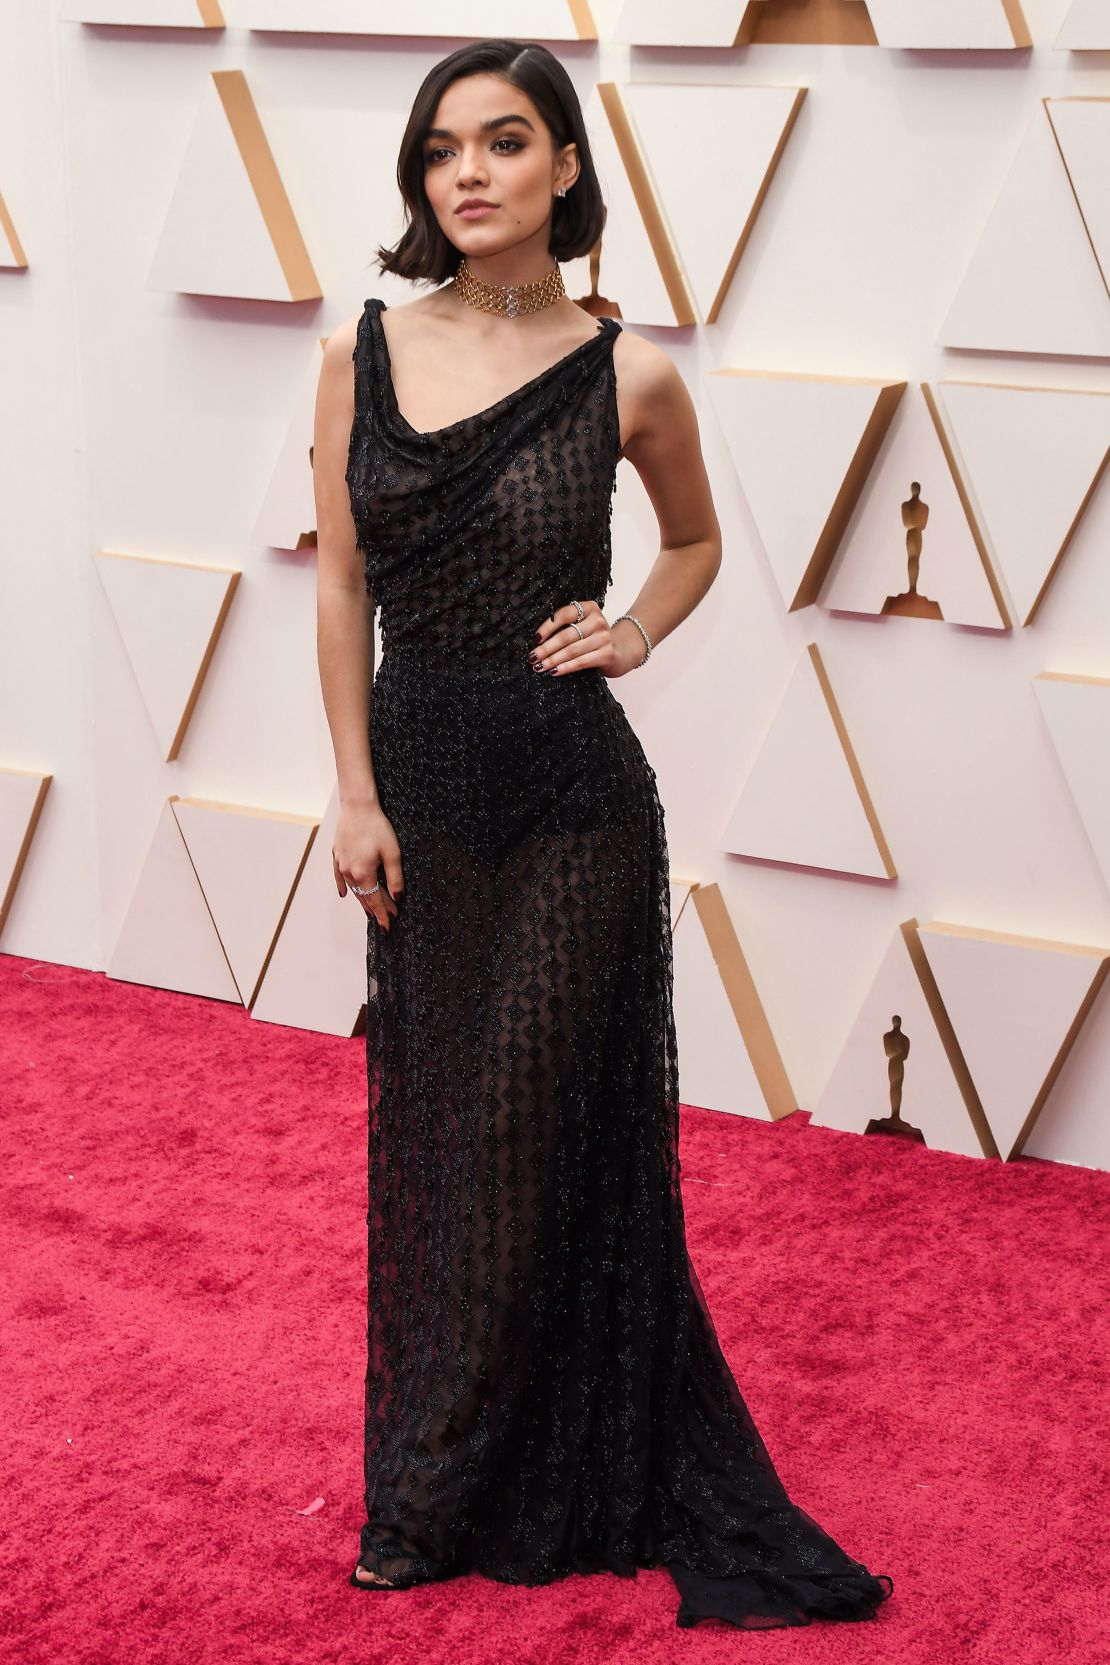 Standout looks from the Oscars 2022 red carpet